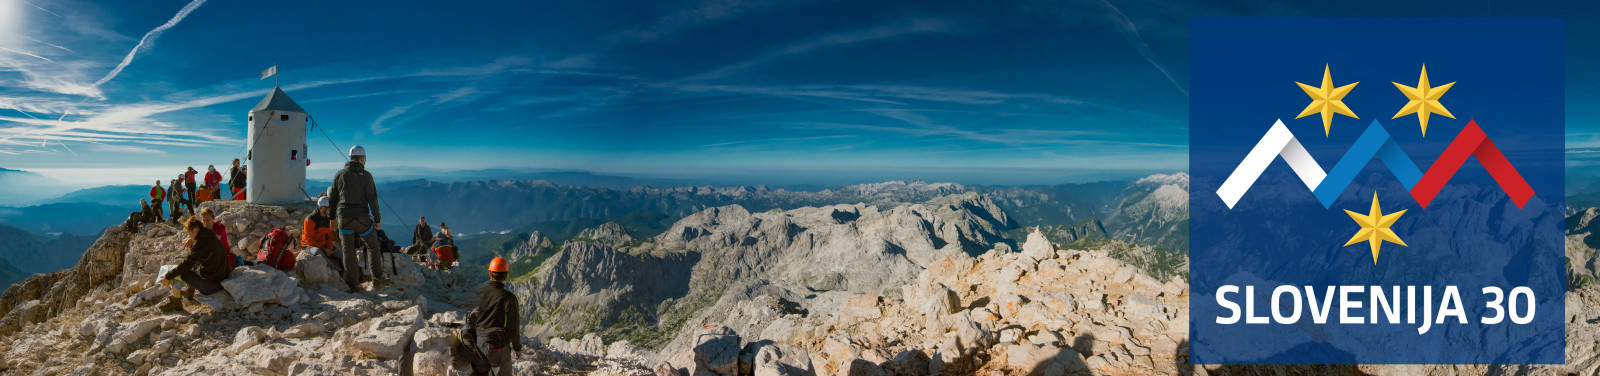 The summit of Triglav with the Aljaž Tower, people sit and stand. Mountain view.